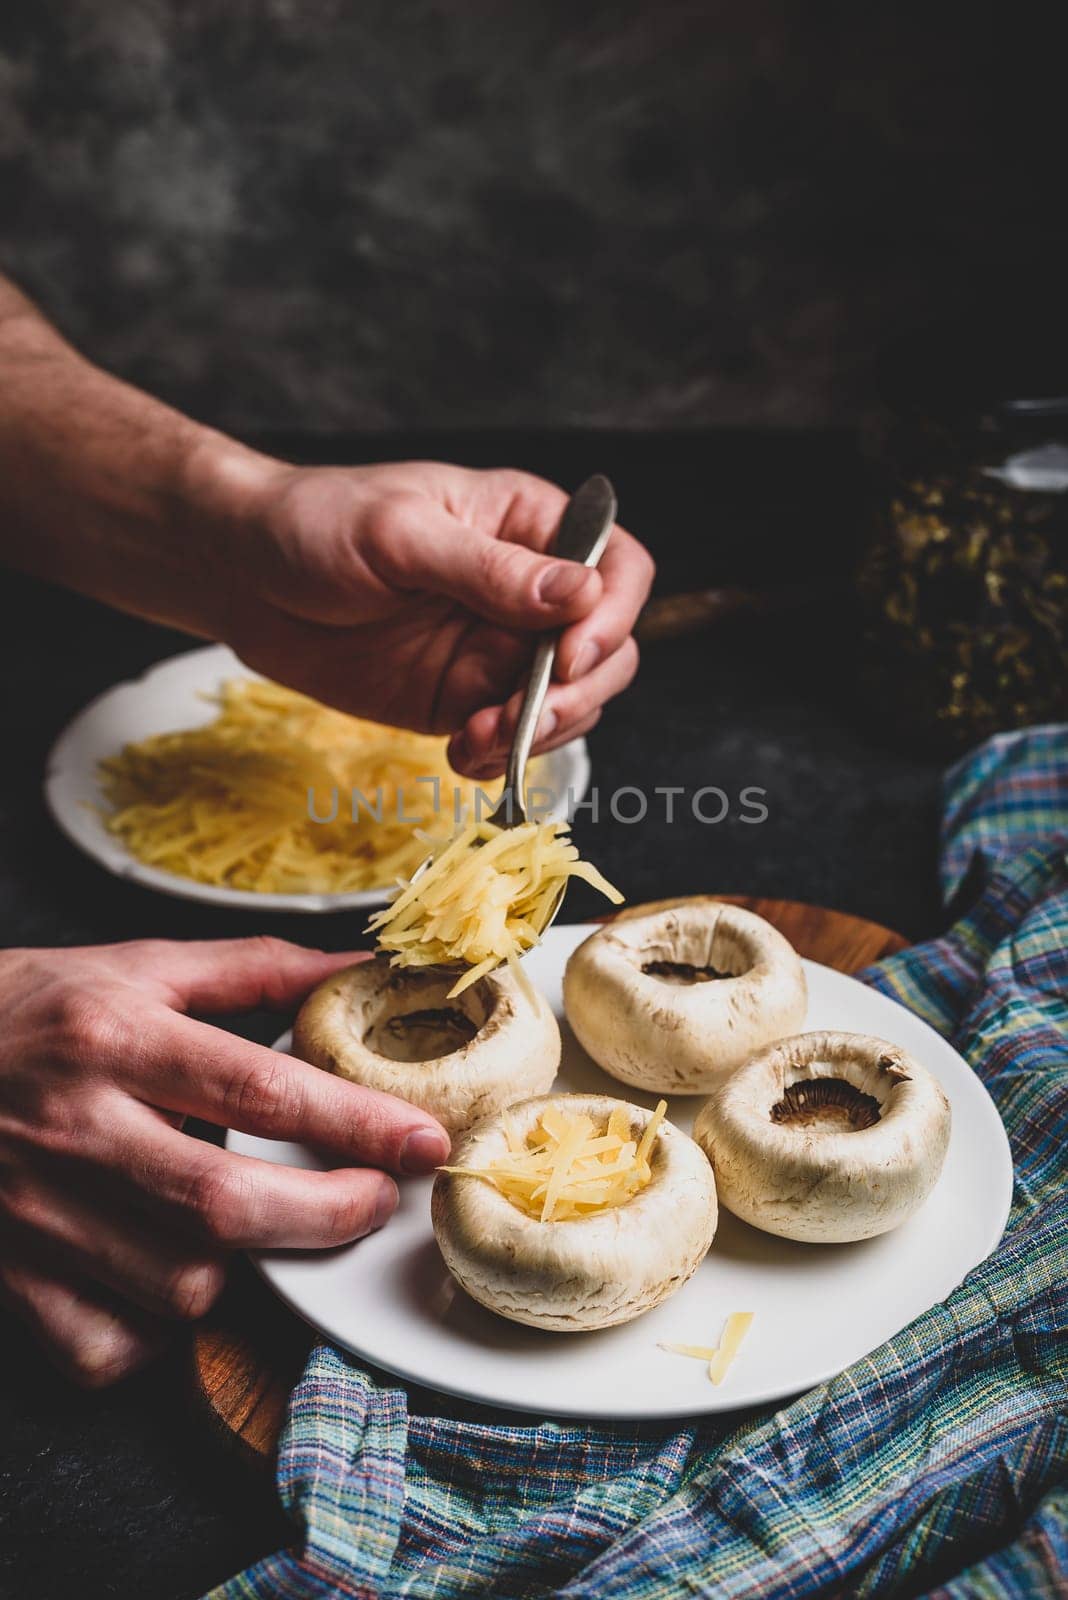 Stuffing mushrooms with grated cheese by Seva_blsv